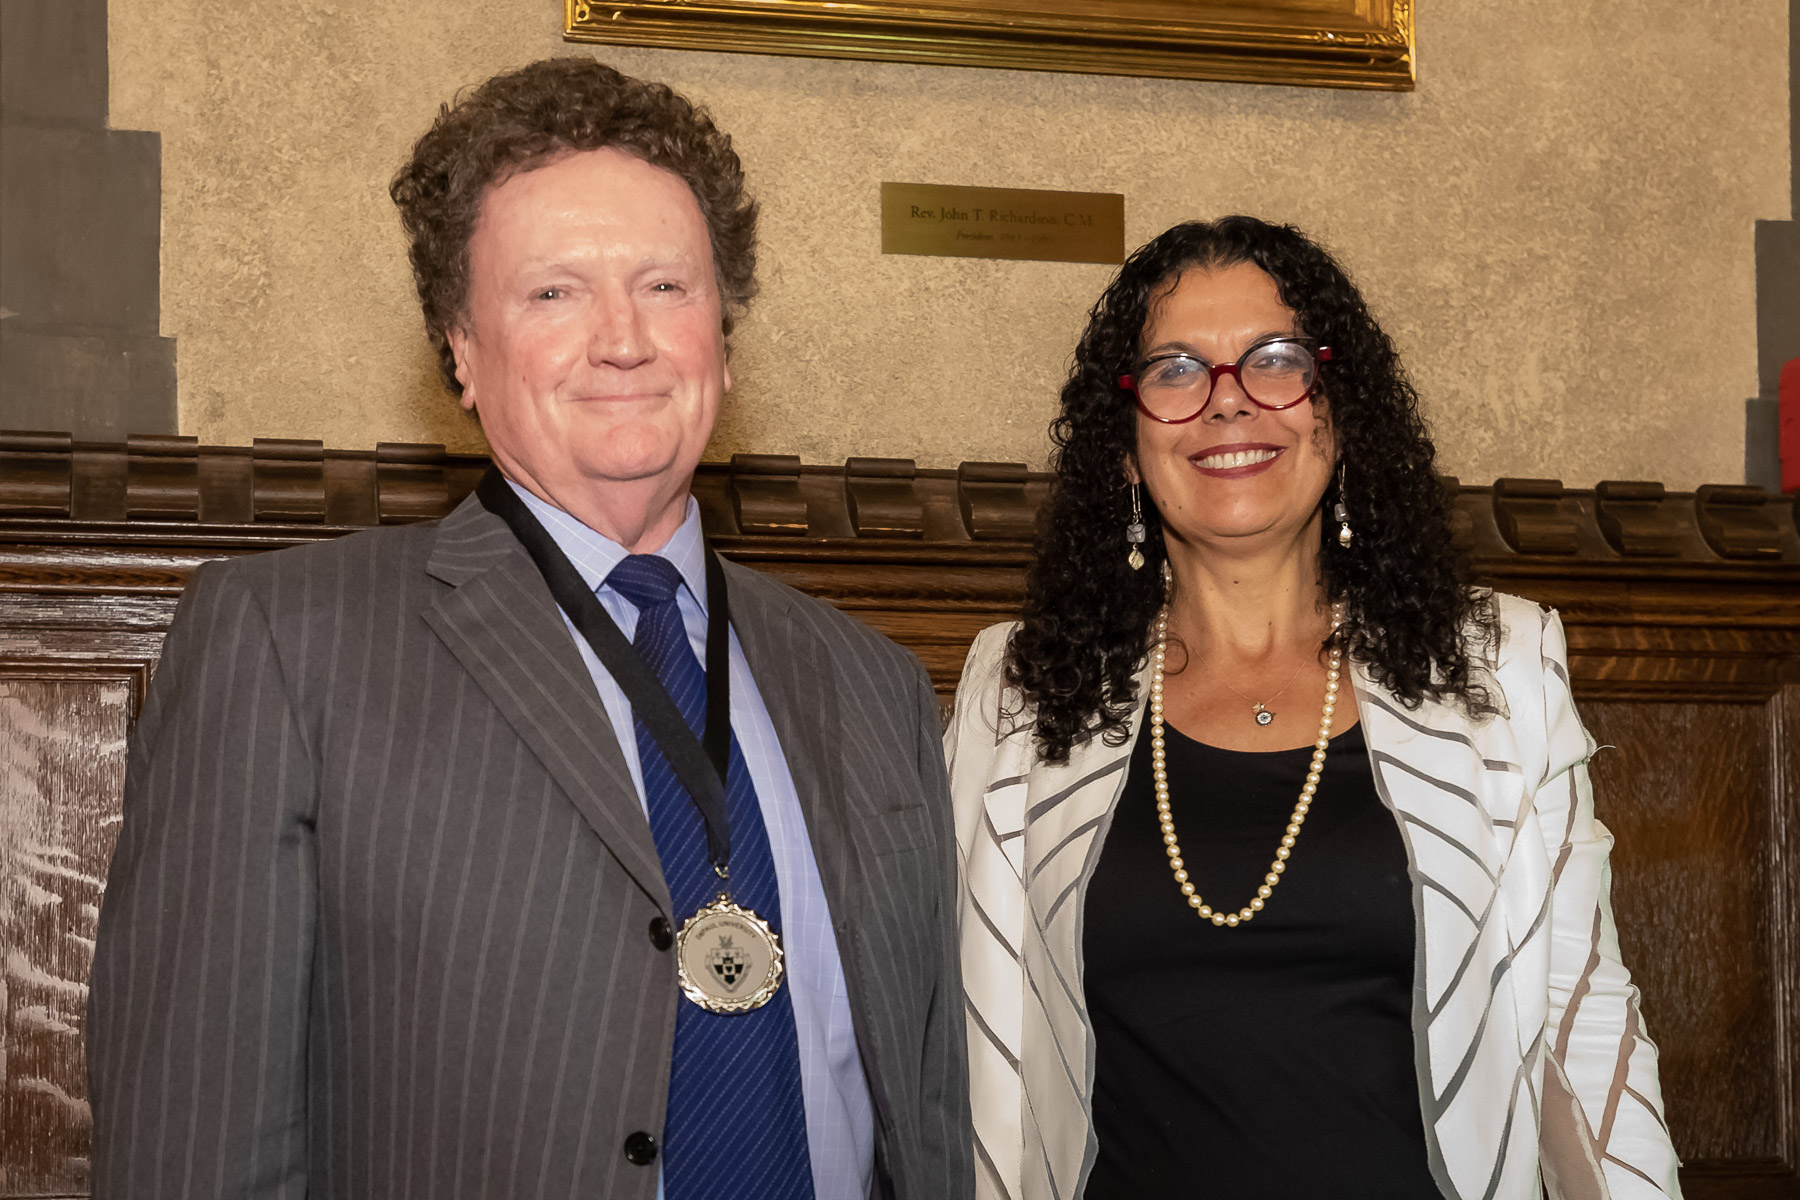 Geoffrey Wiseman, with Provost Salma Ghanem, wears the medal that symbolizes his endowed chair position.